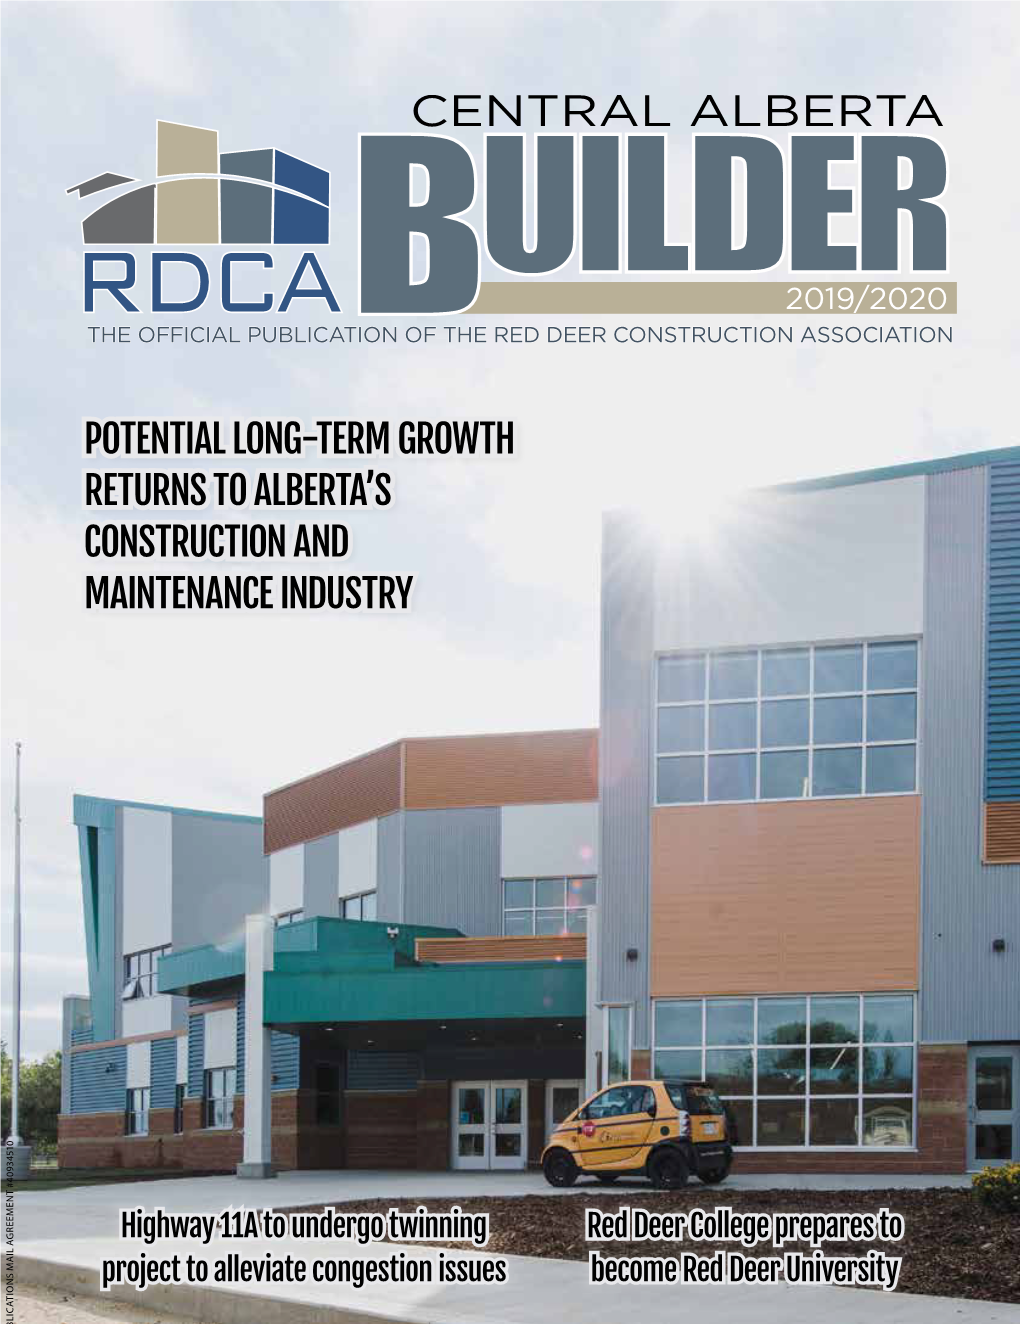 Potential Long-Term Growth Returns to Alberta's Construction and Maintenance Industry